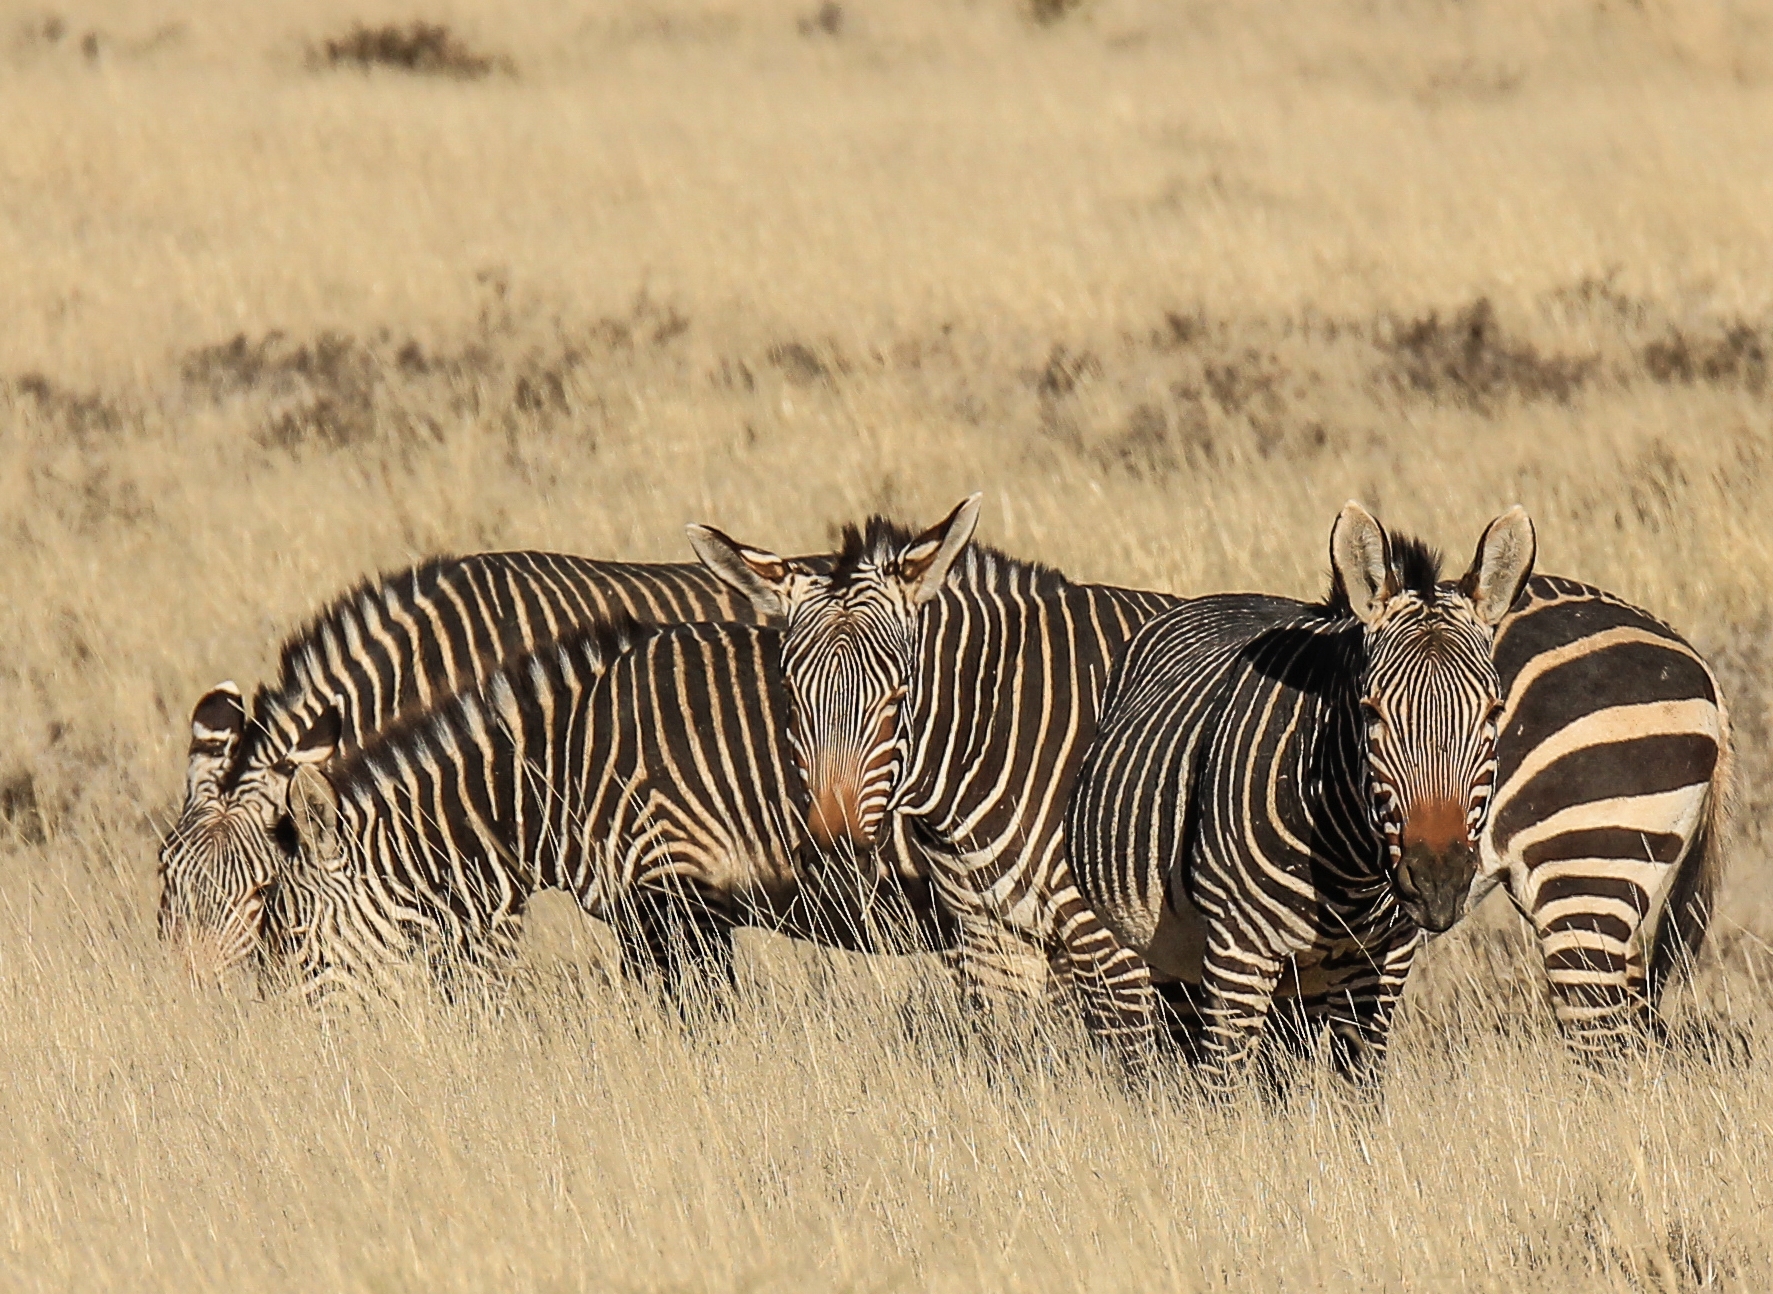 This zebra is a hardy mountain habitat specialist and the smallest of the wild equids.